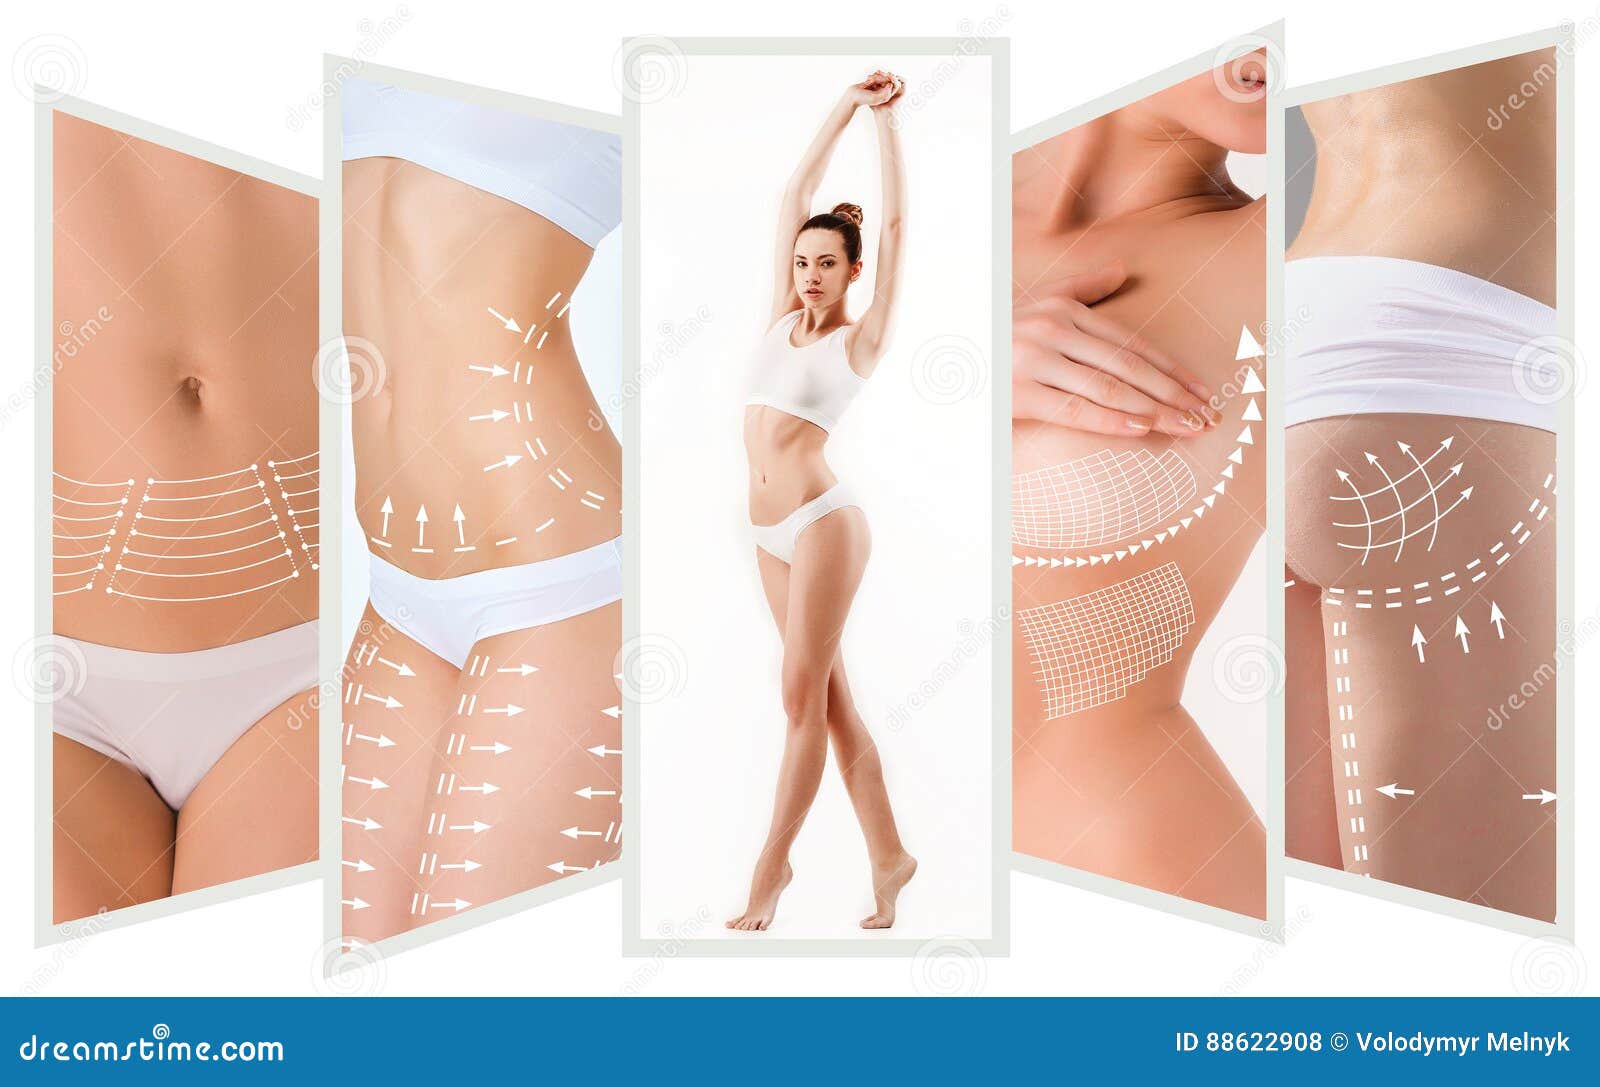 the cellulite removal plan. white markings on young woman body